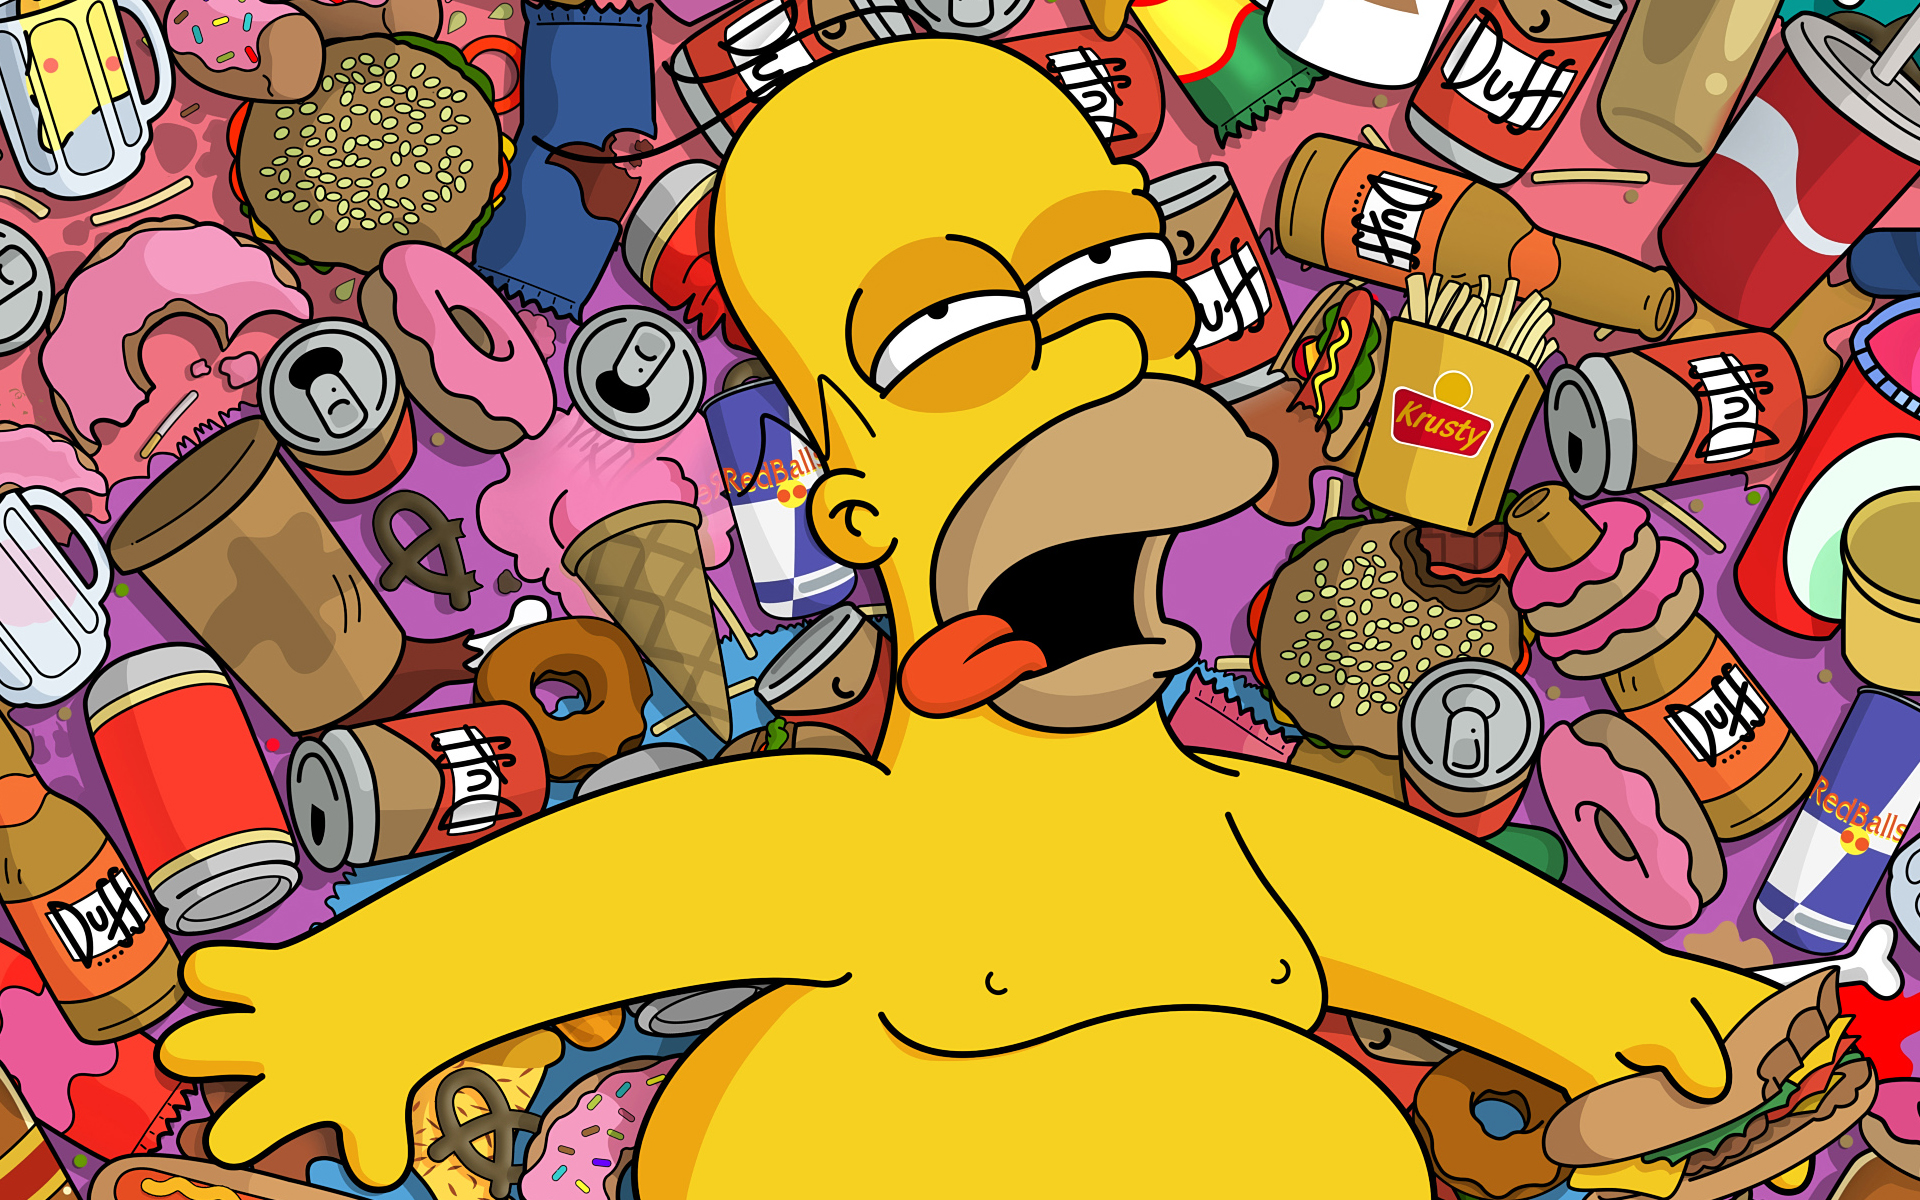 The Simpsons Homer Simpson Donut Beer Food Humor Cartoon Tongue Out Open Mouth Fast Food TV Series 1920x1200